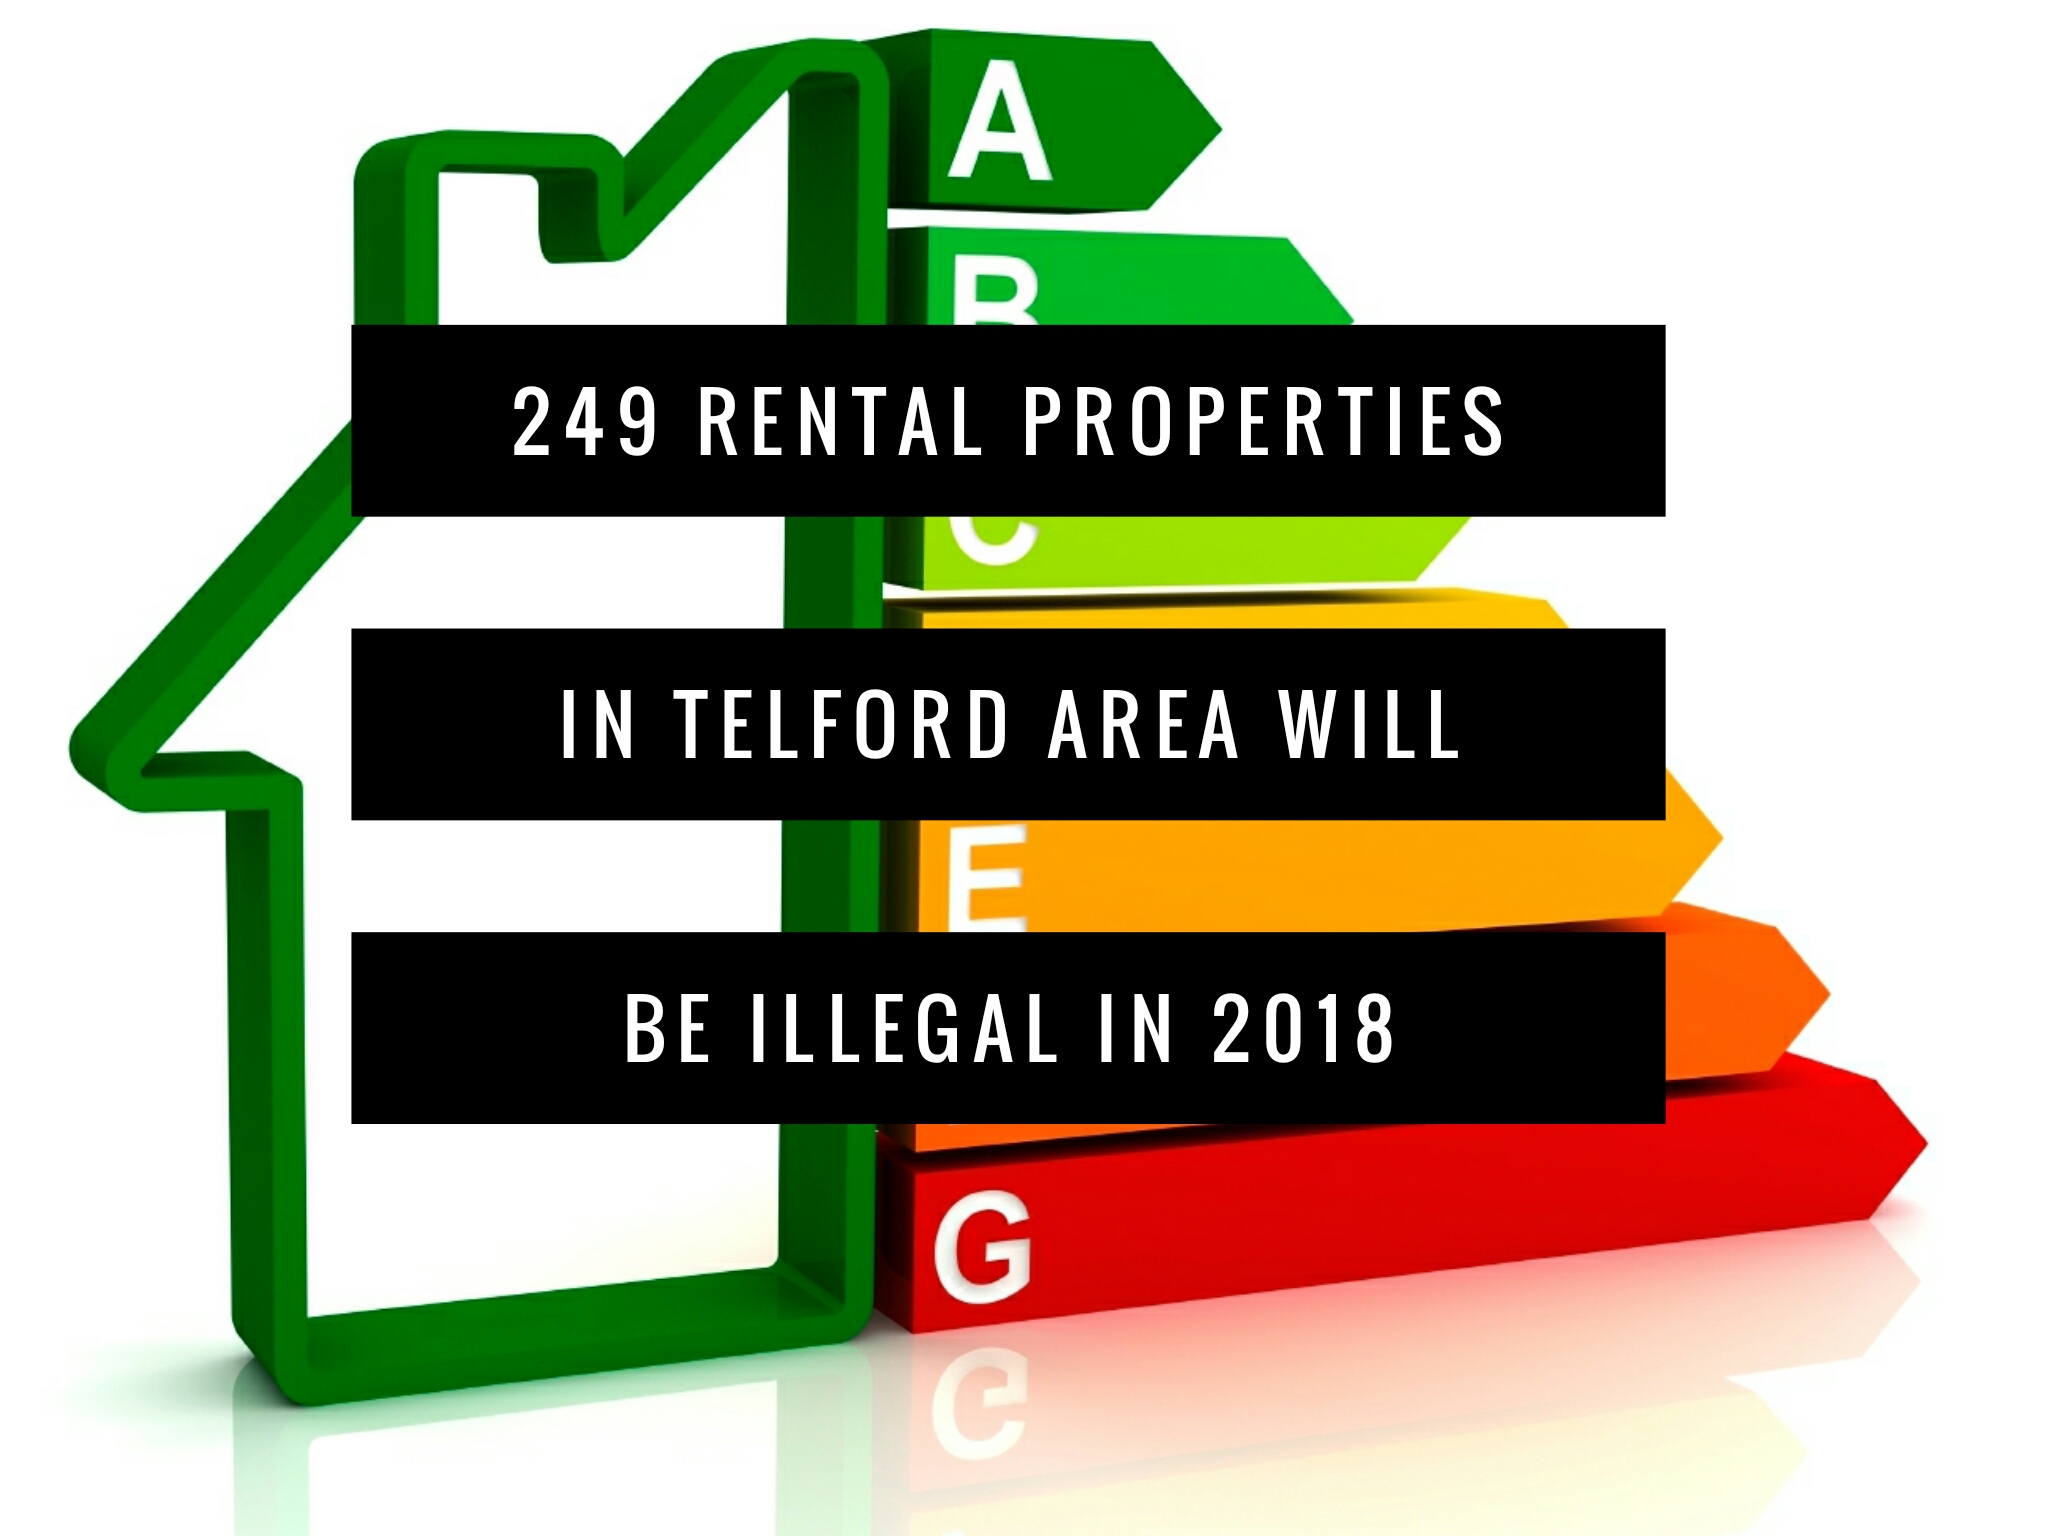 249 rental properties in the Telford area will be illegal in 2018